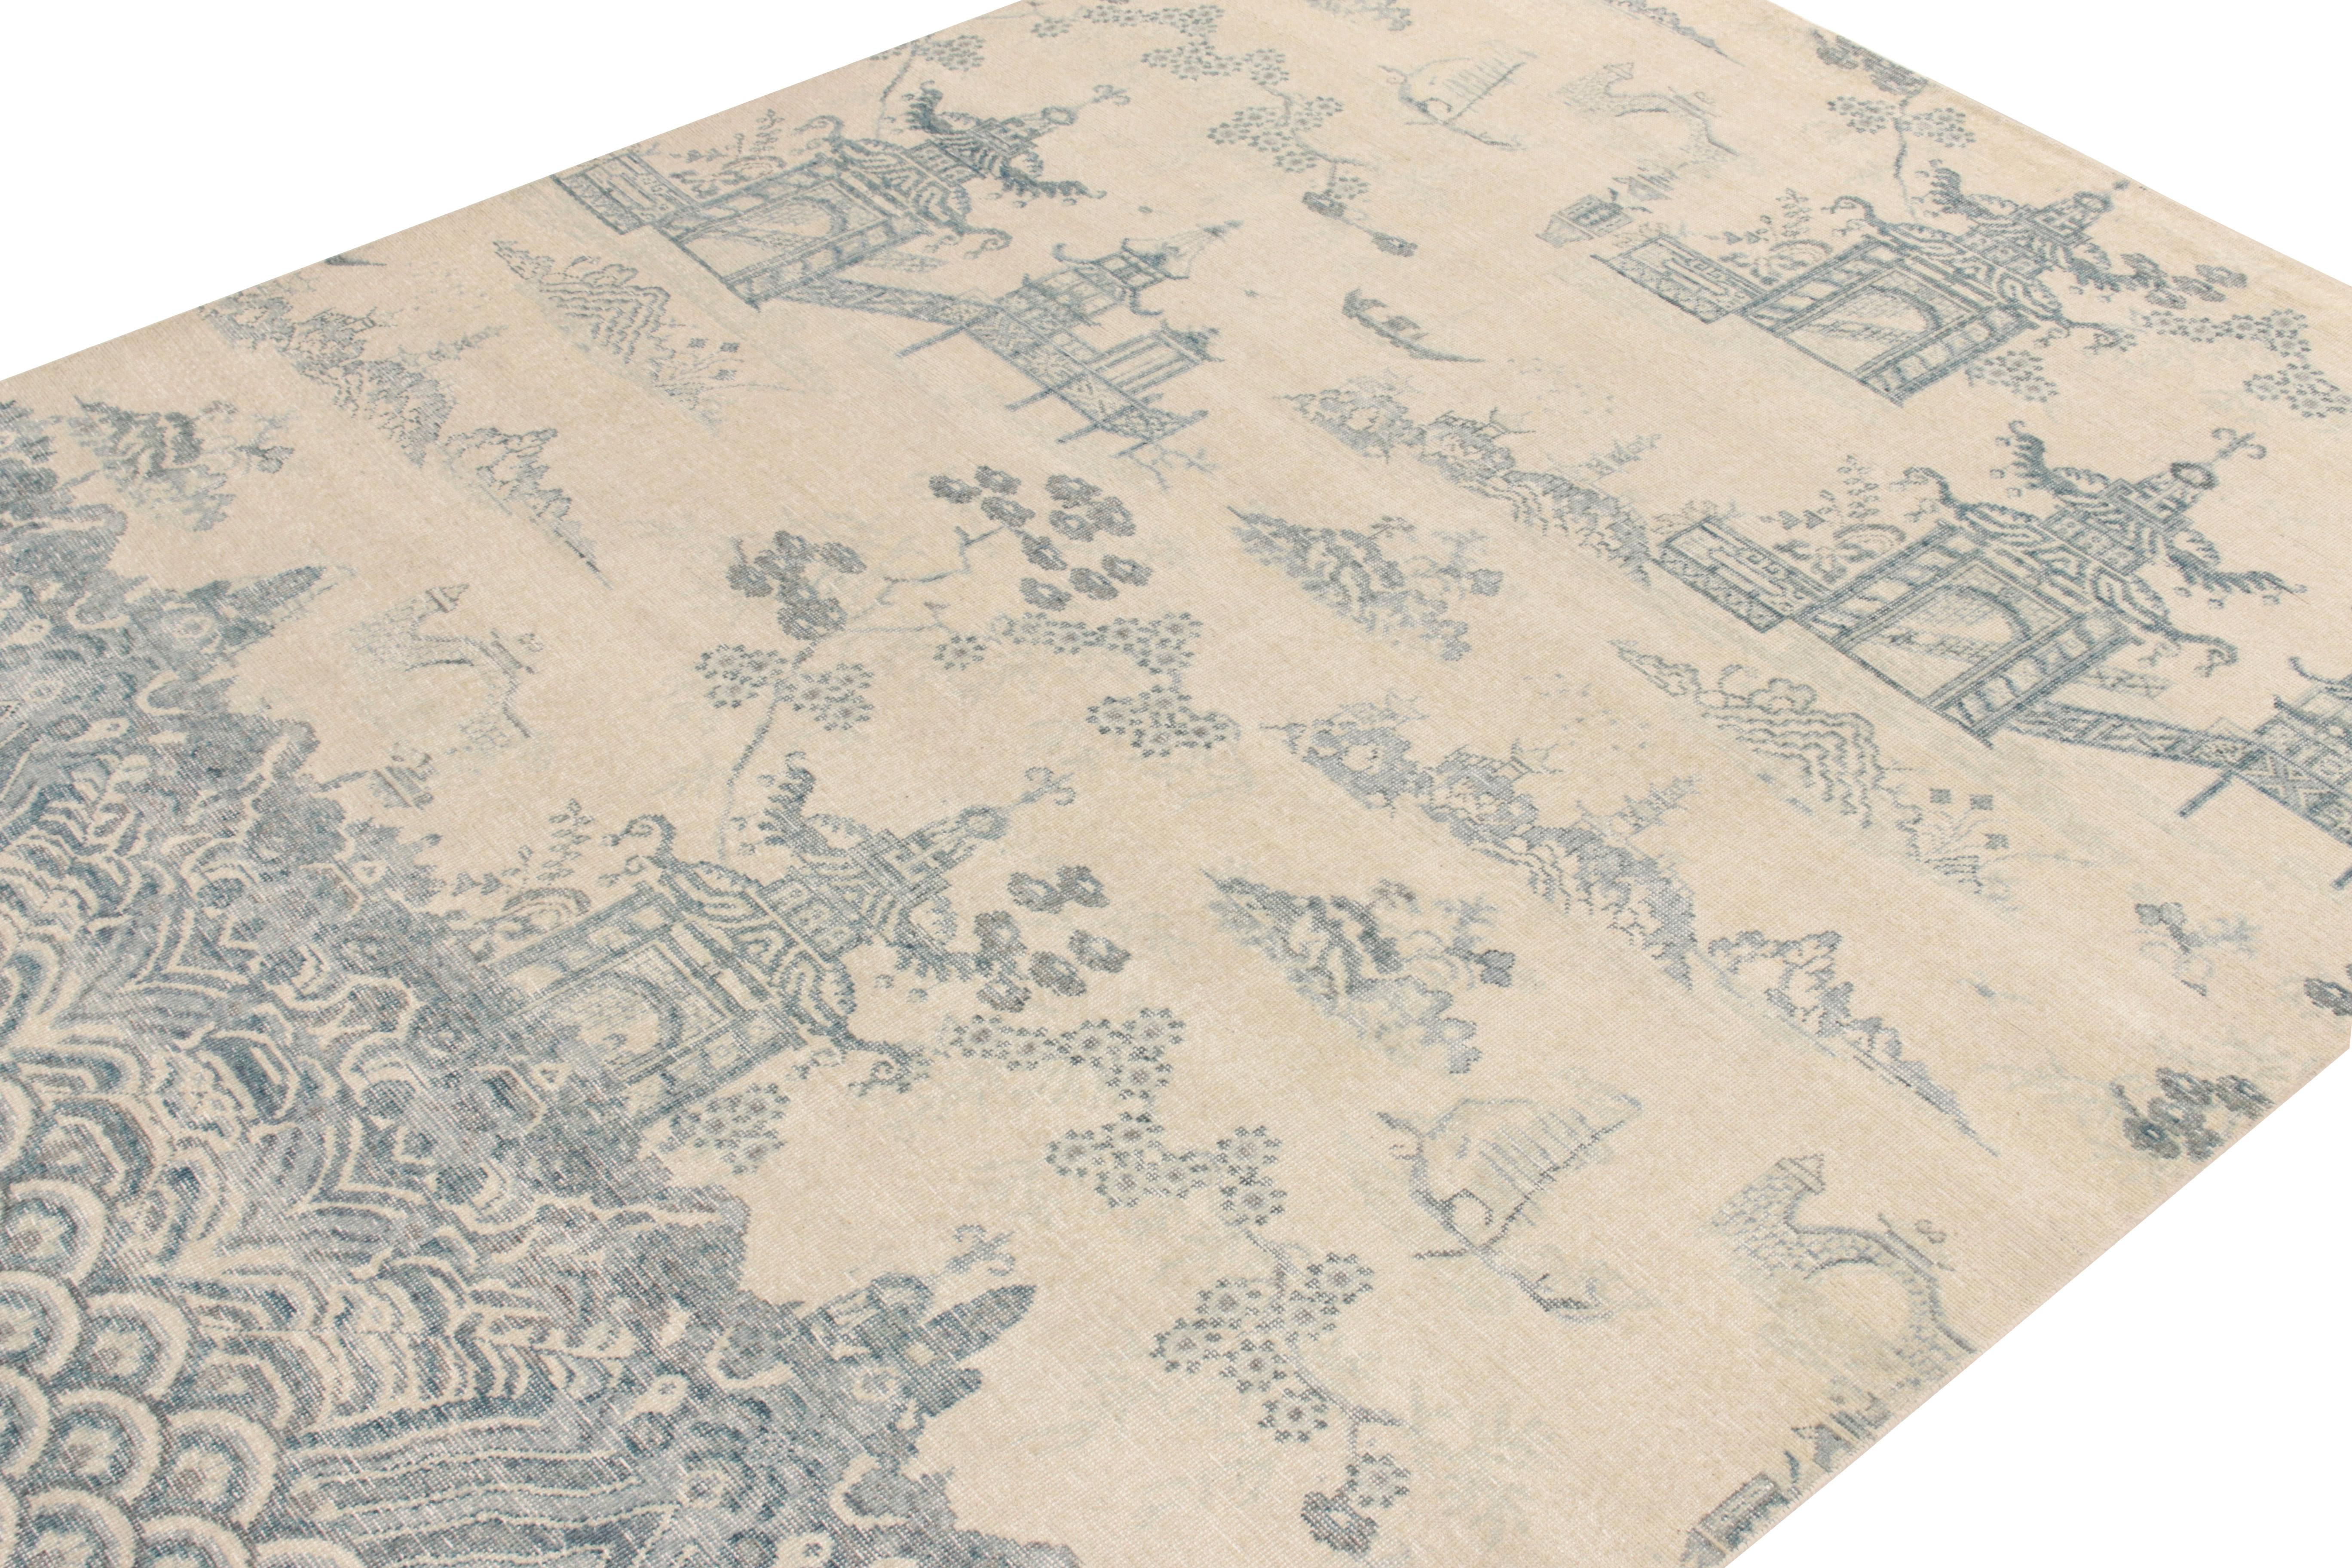 Indian Rug & Kilim's Distressed Chinese Pictorial Style Rug in Blue, Off-White Pattern For Sale